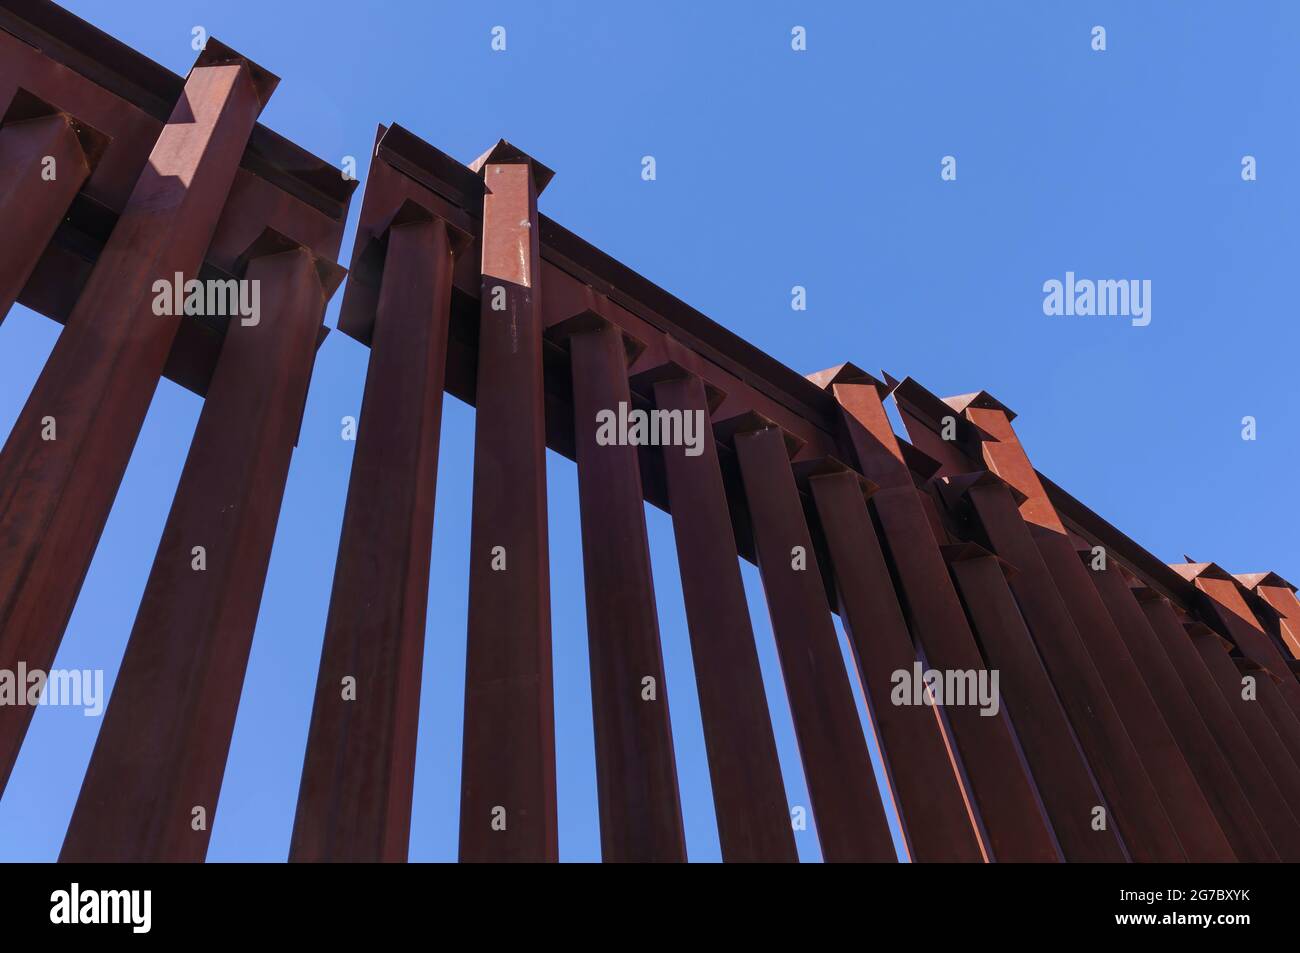 Image shows US border fence on the Mexico border, east of Nogales Arizona and Nogales Sonora Mexico, viewed from US side.This type of barrier is “boll Stock Photo